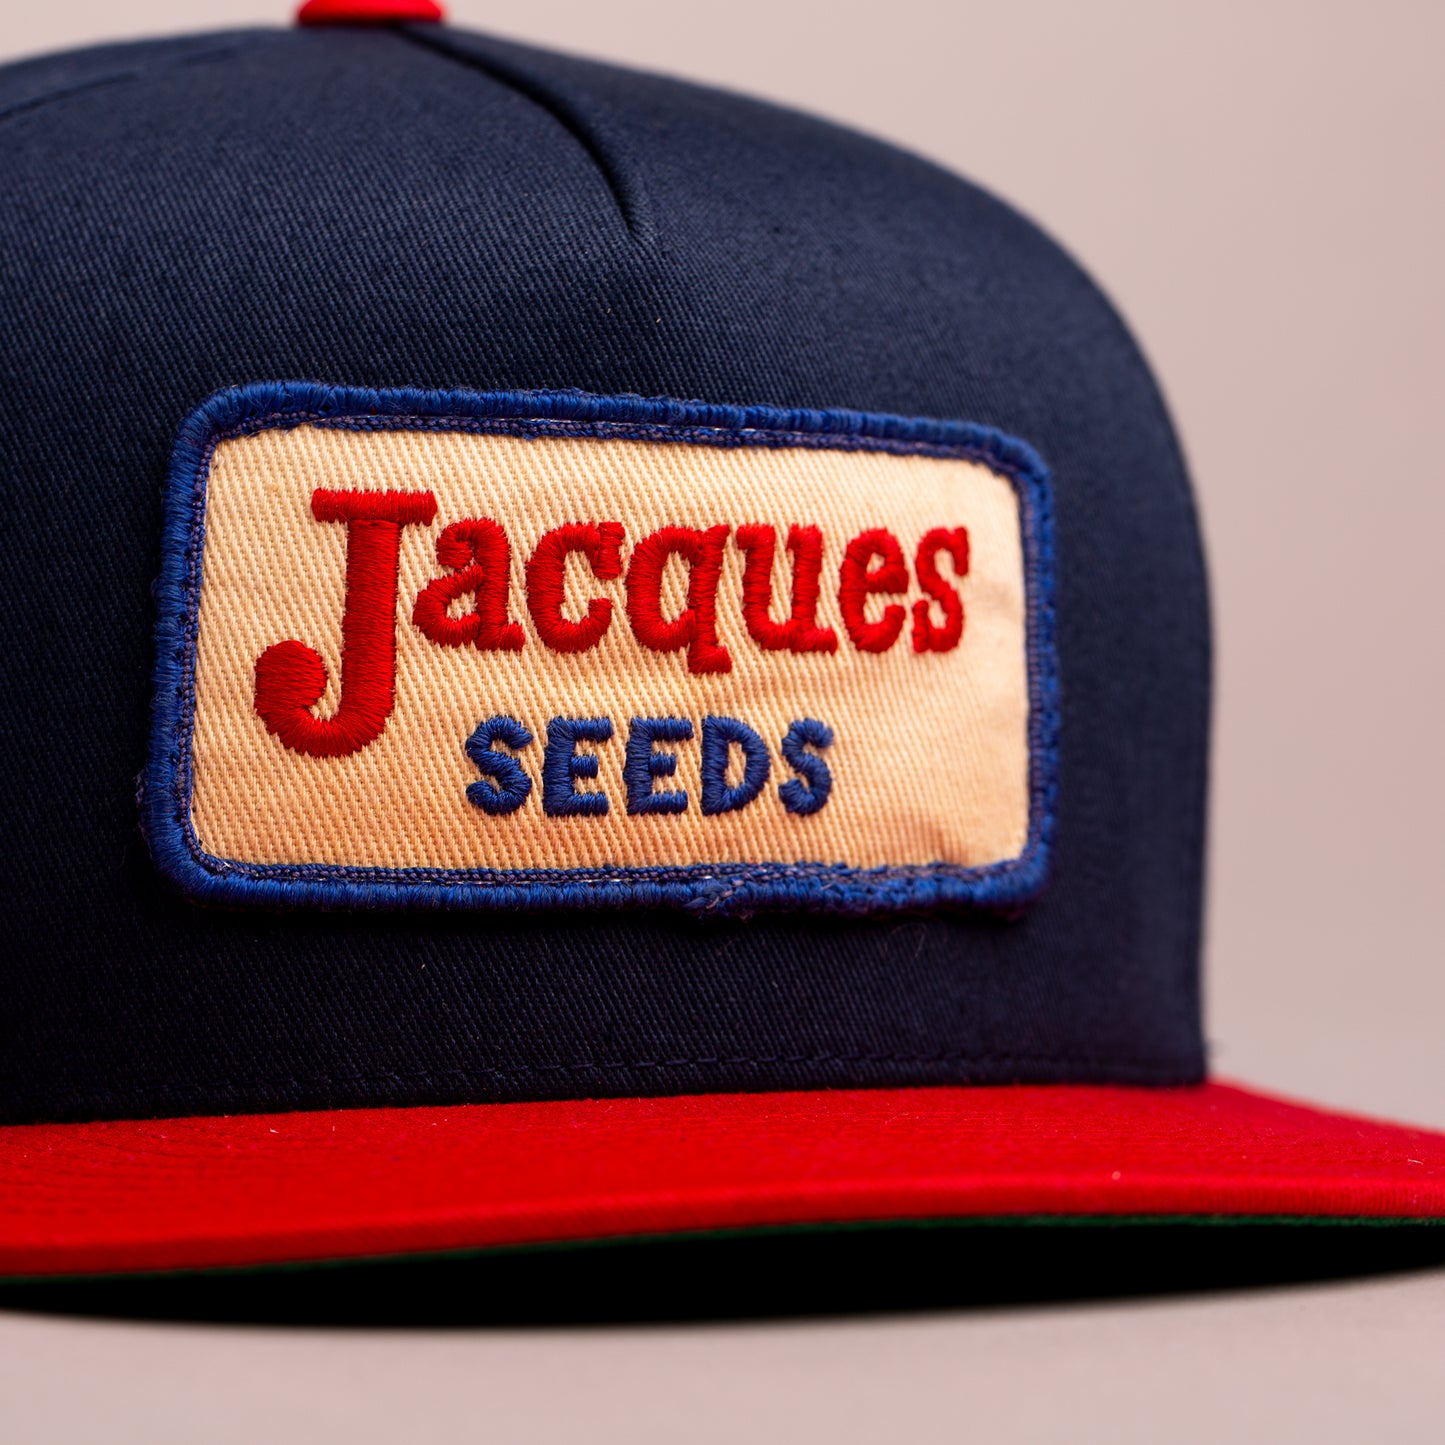 Jacques Seeds